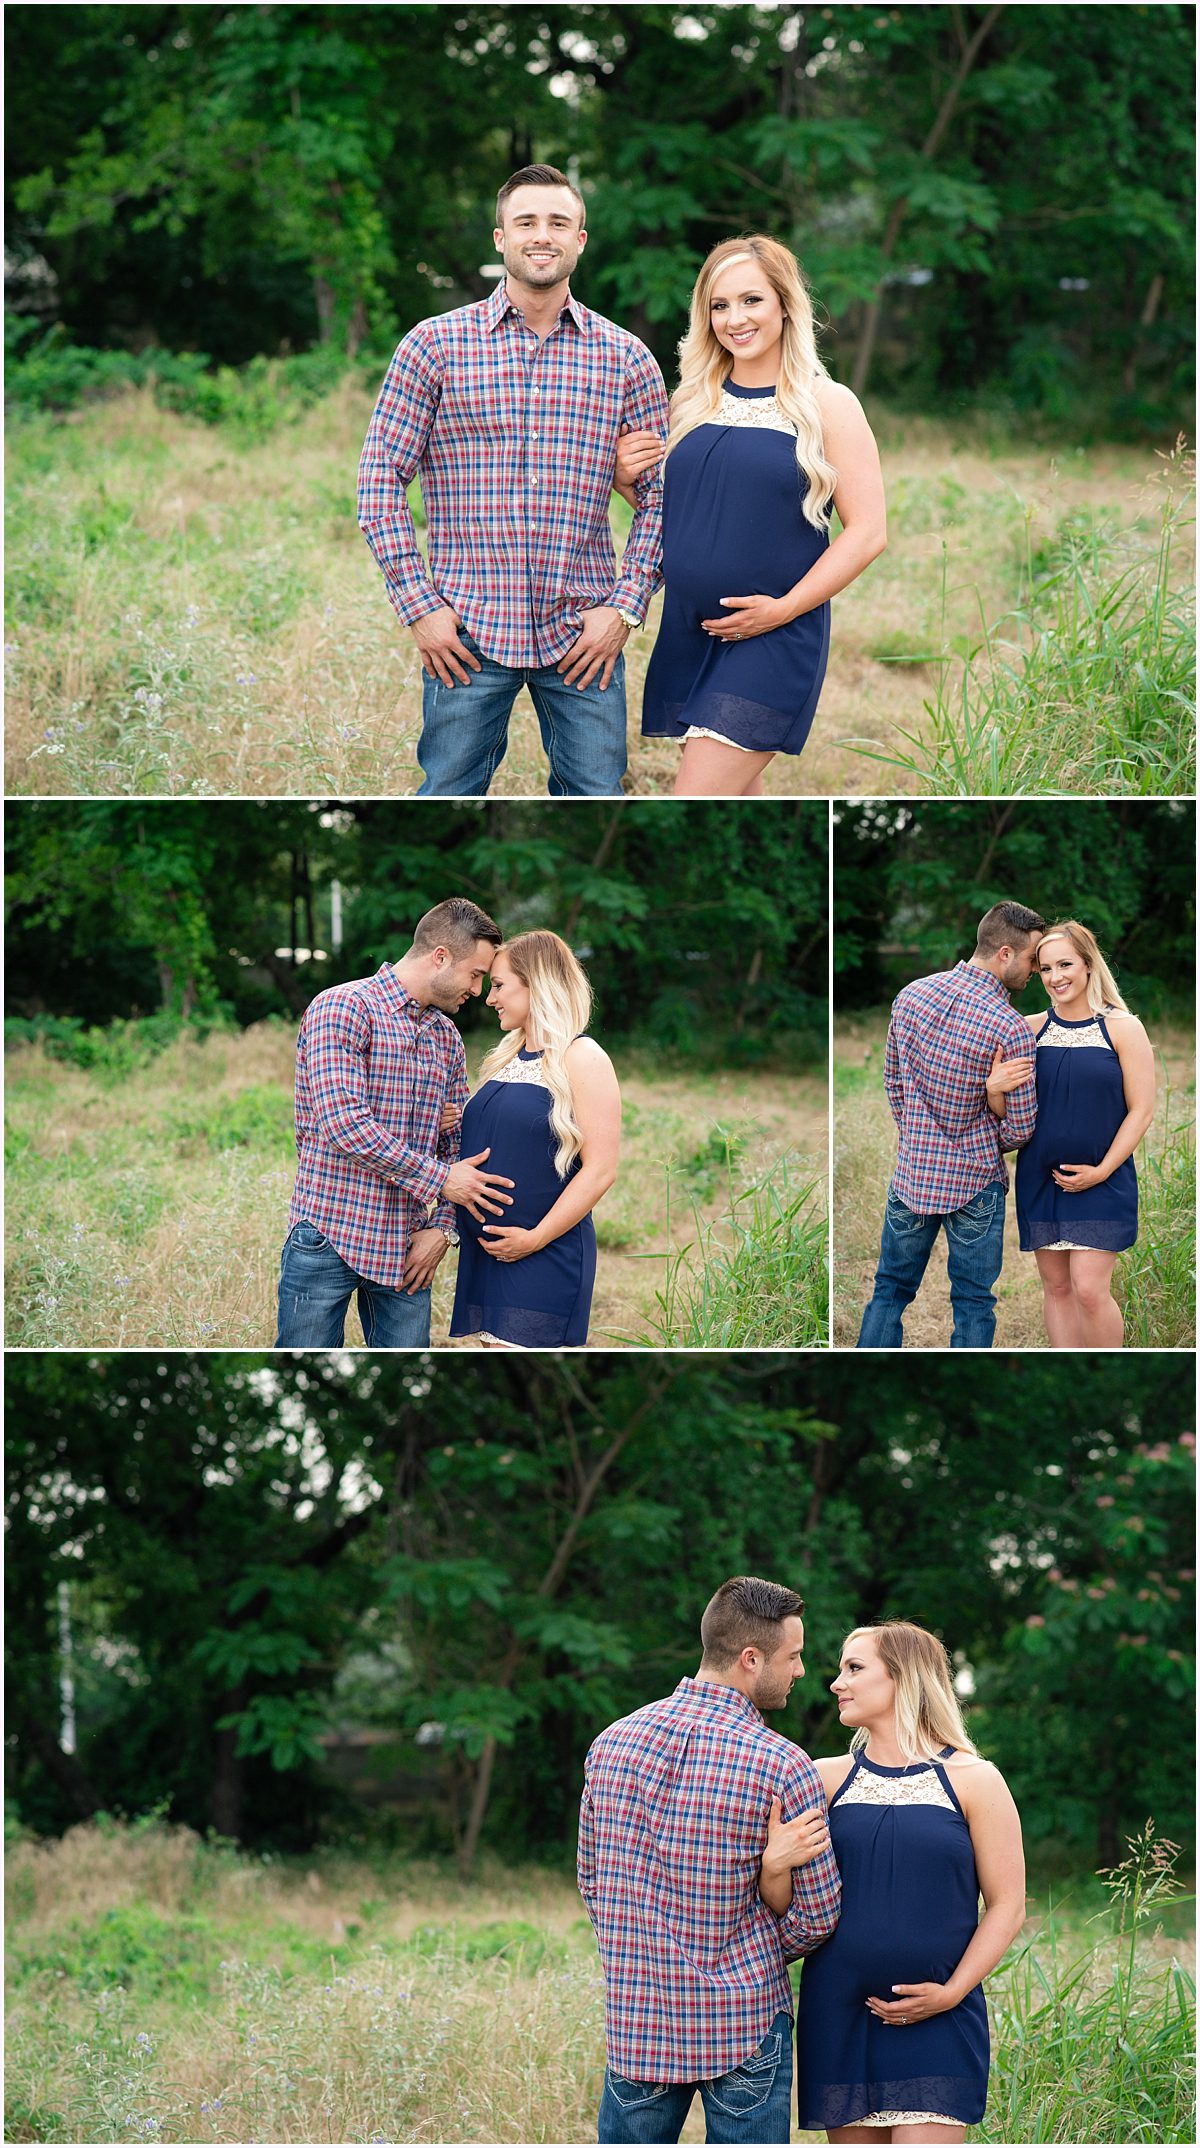 Fort Worth Maternity Photographer Outdoor Couple Maternity Session by Vanja D Photography www.vanjad.com